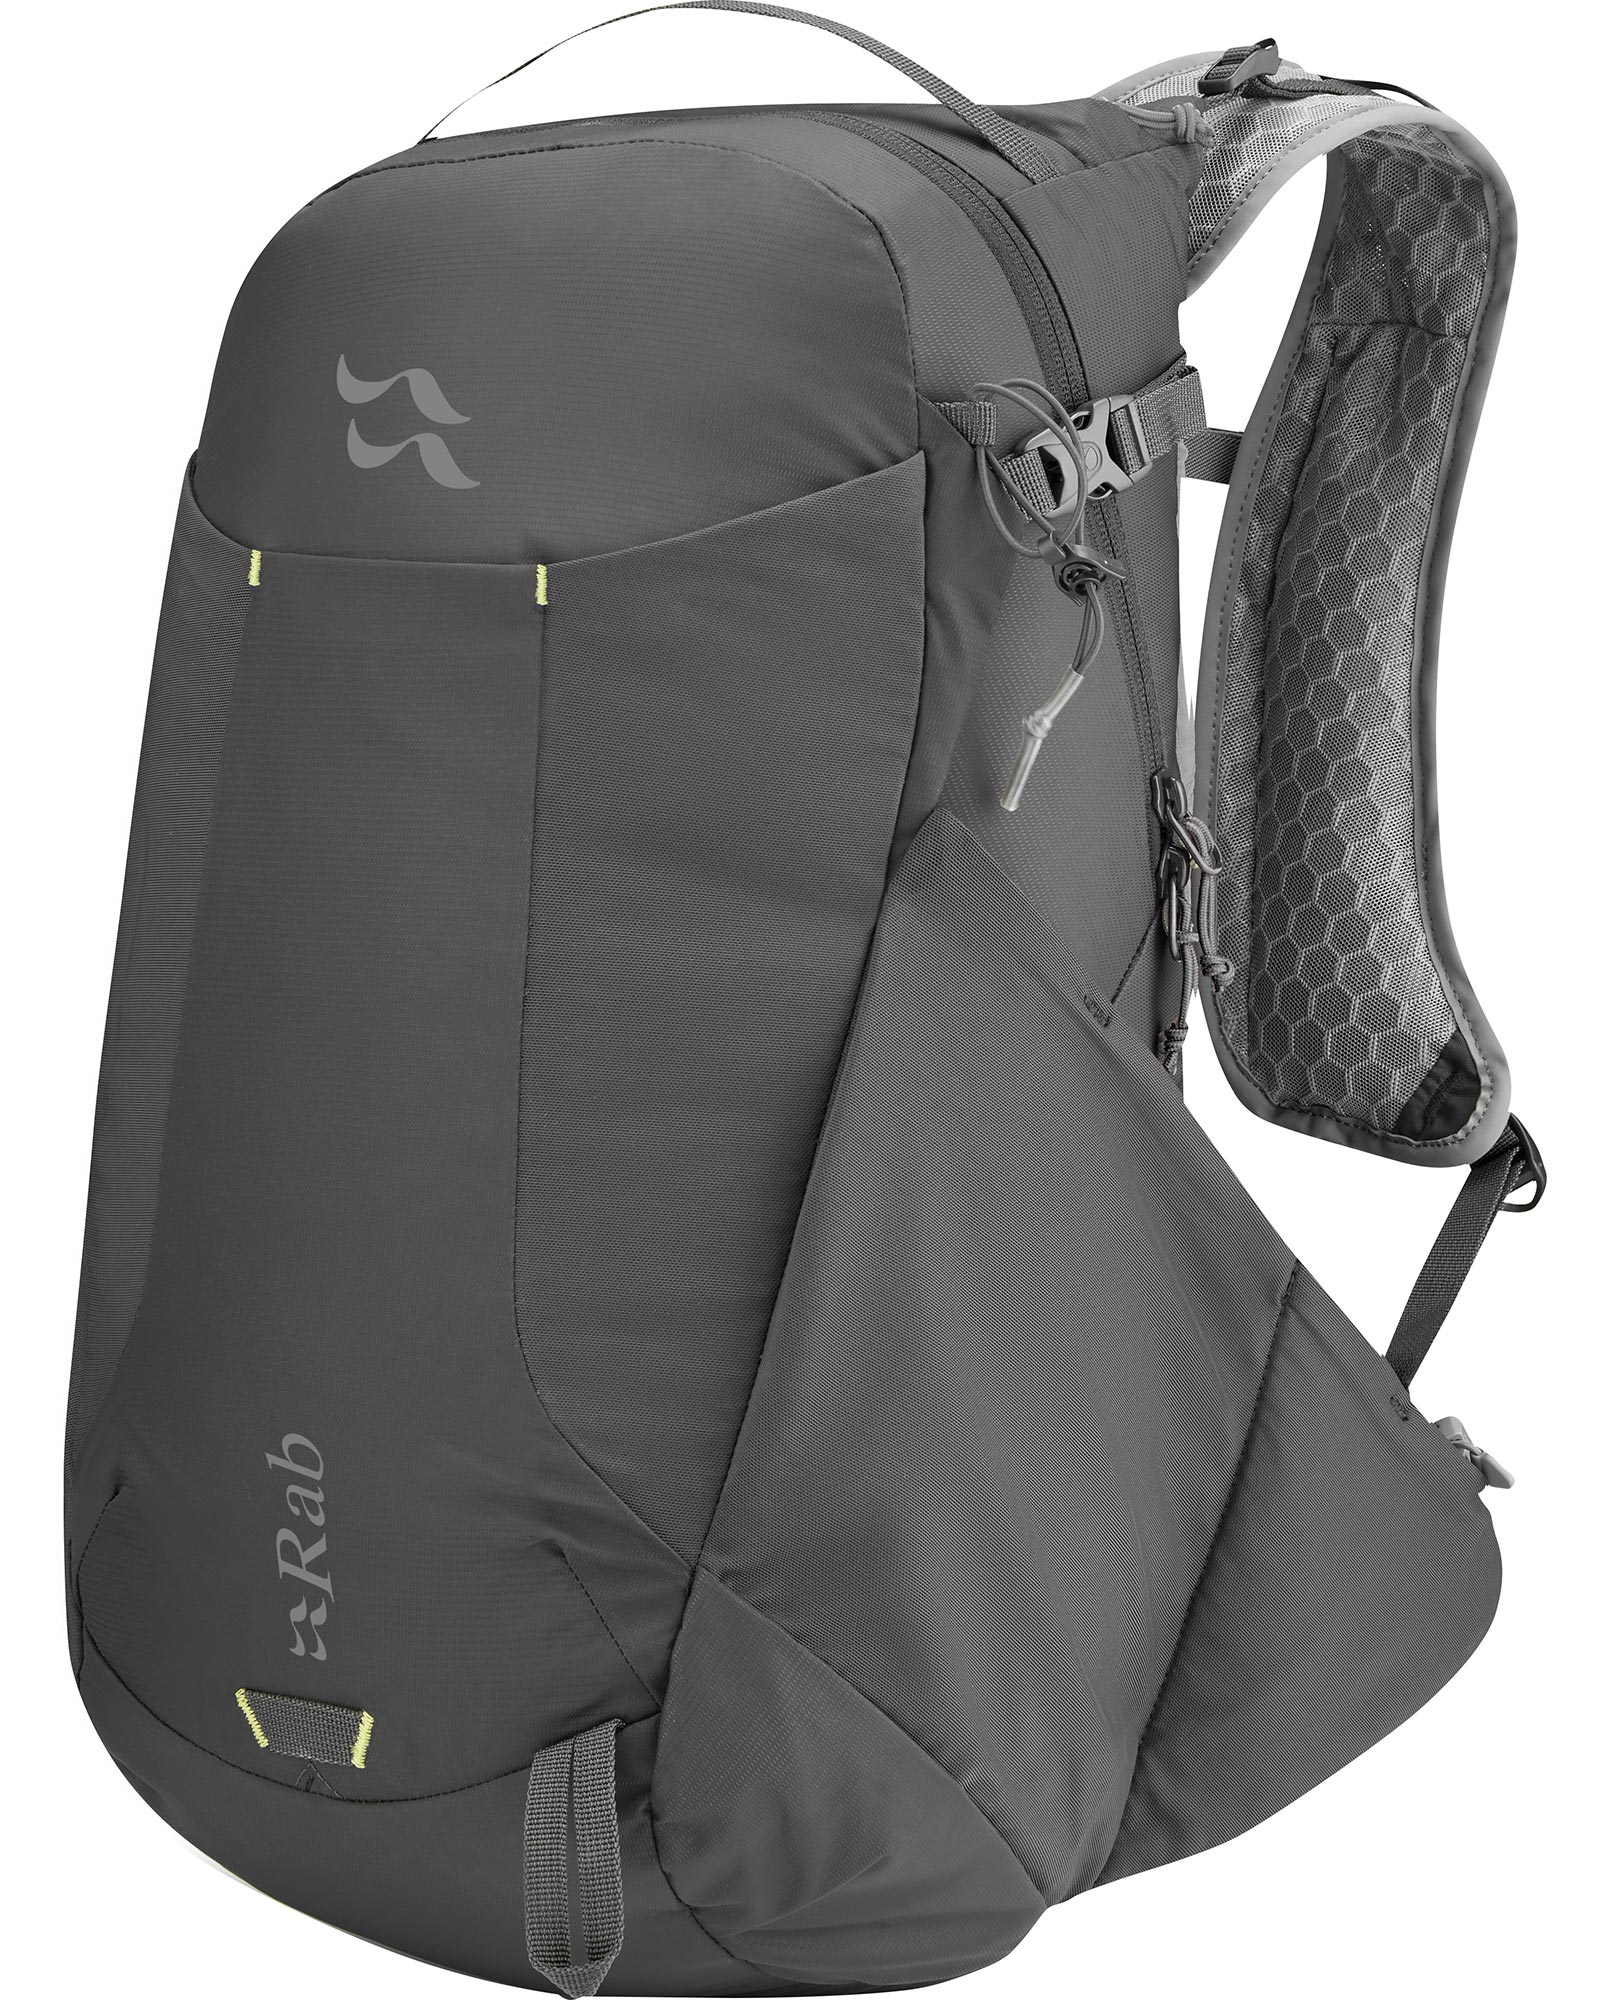 Rab Aeon LT 25 Backpack - Anthracite